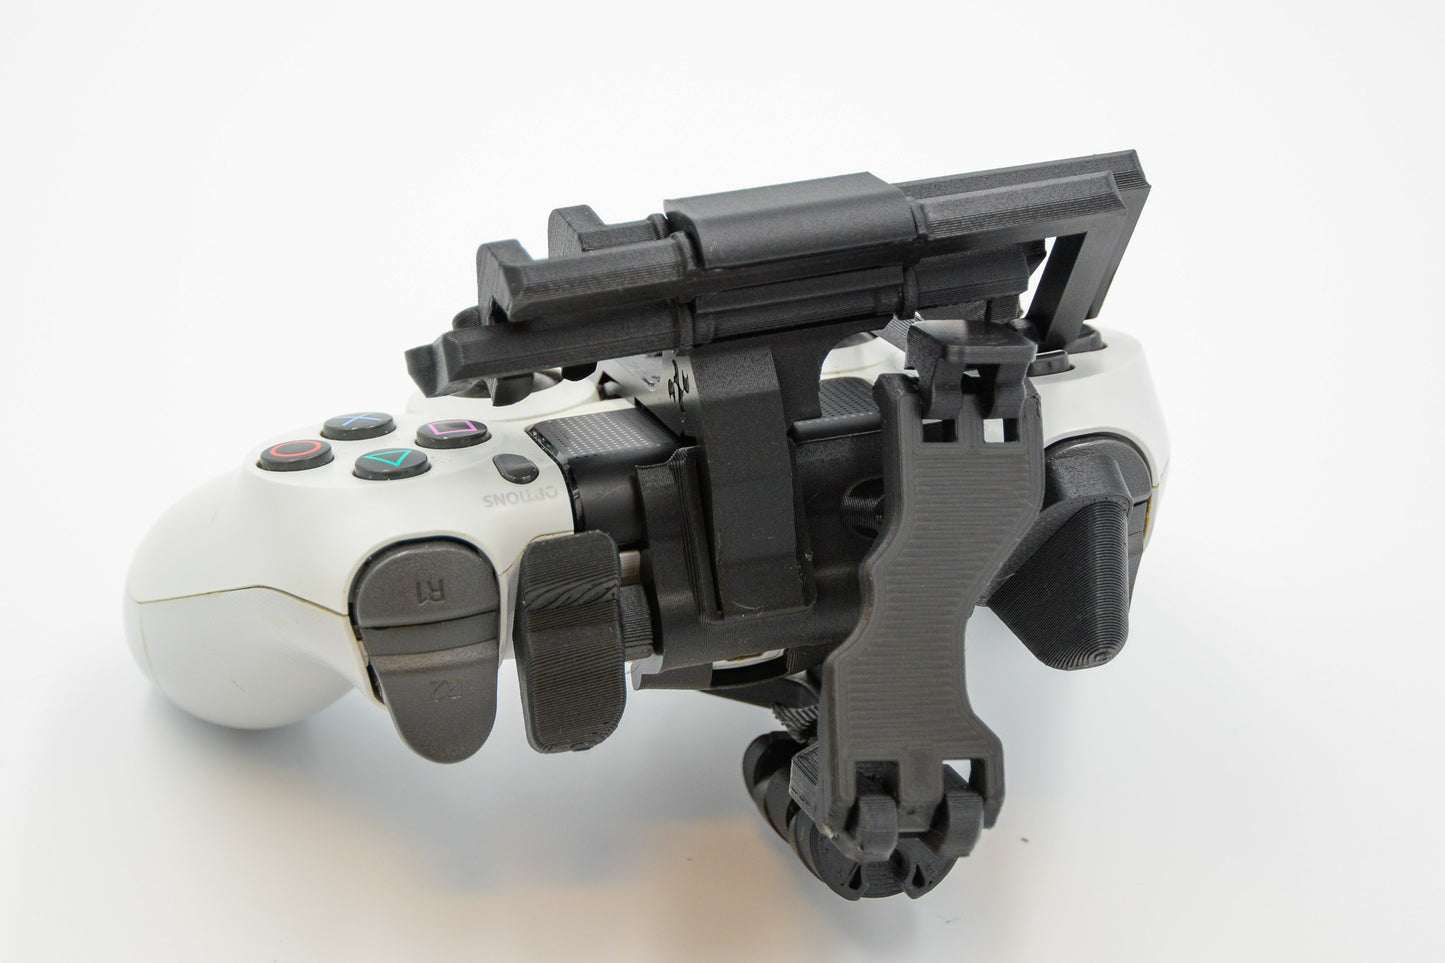 One-handed PS4 DualShock 4 Attachment